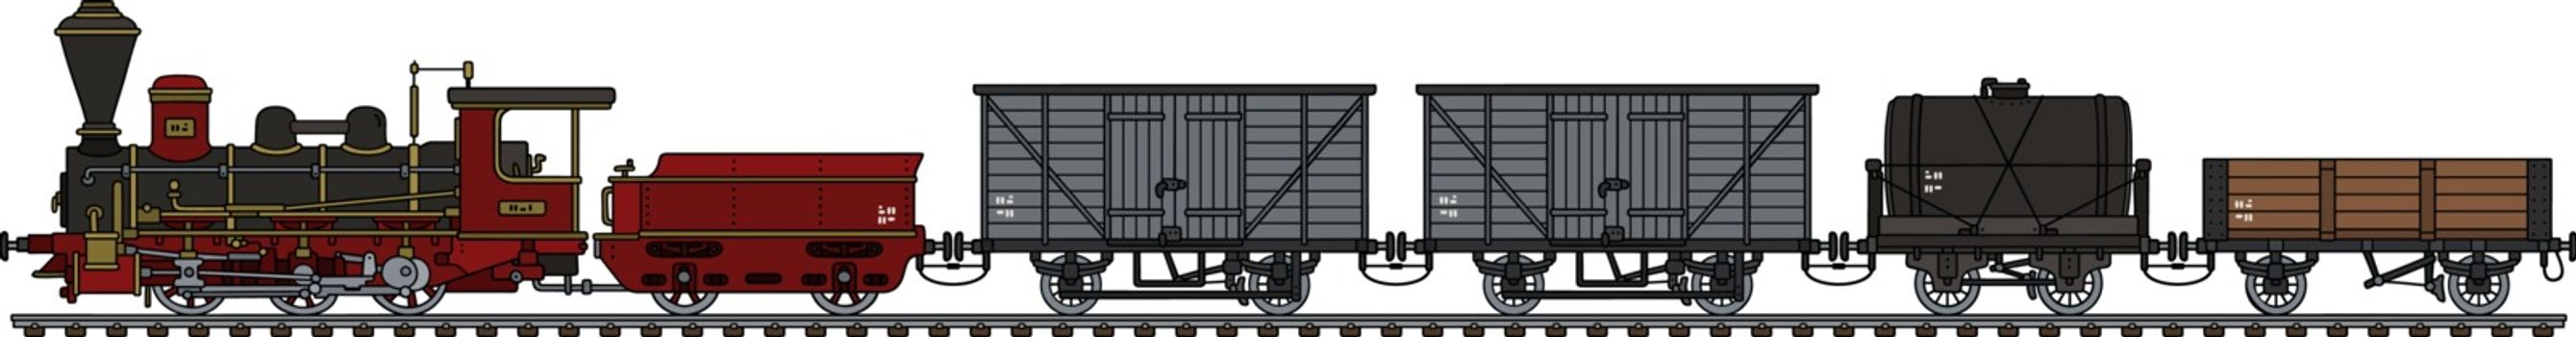 Hand drawing of a historical steam freight train